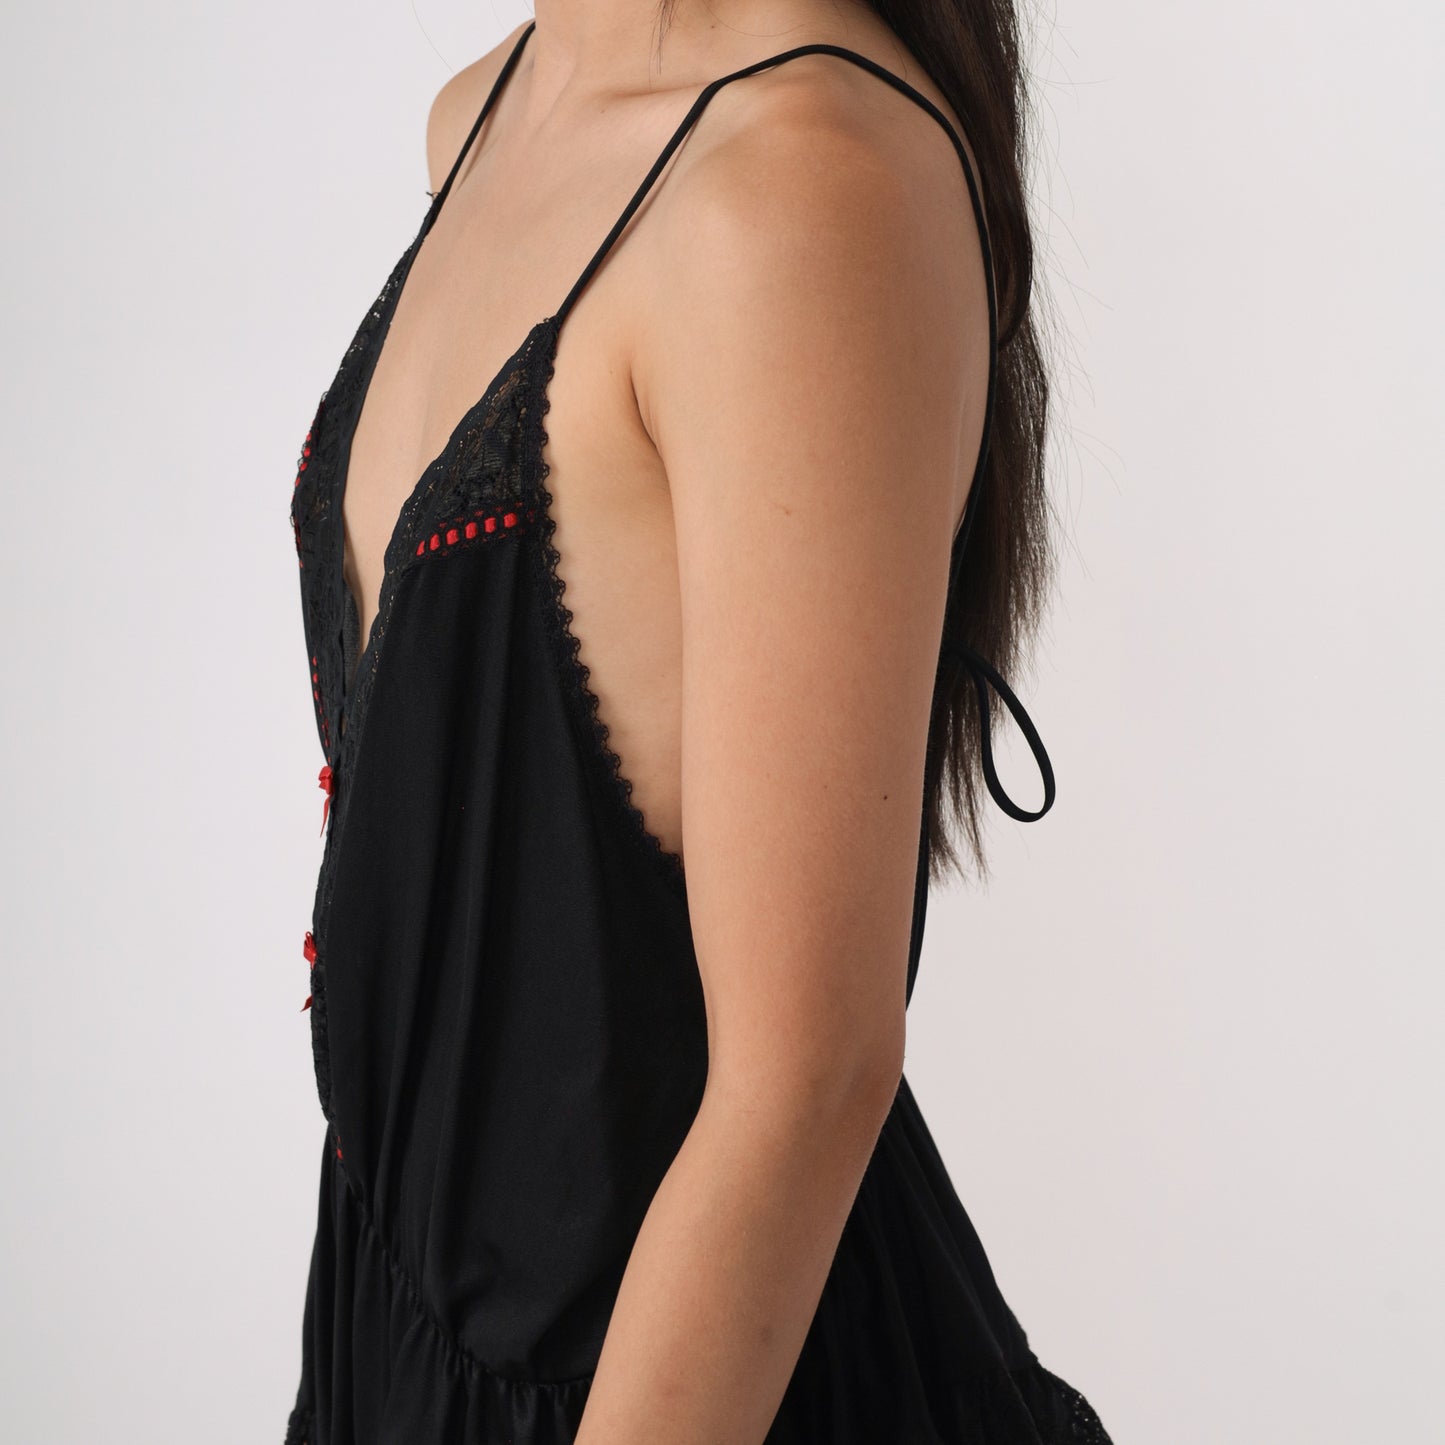 80's Black Lace with Red Accents Romper